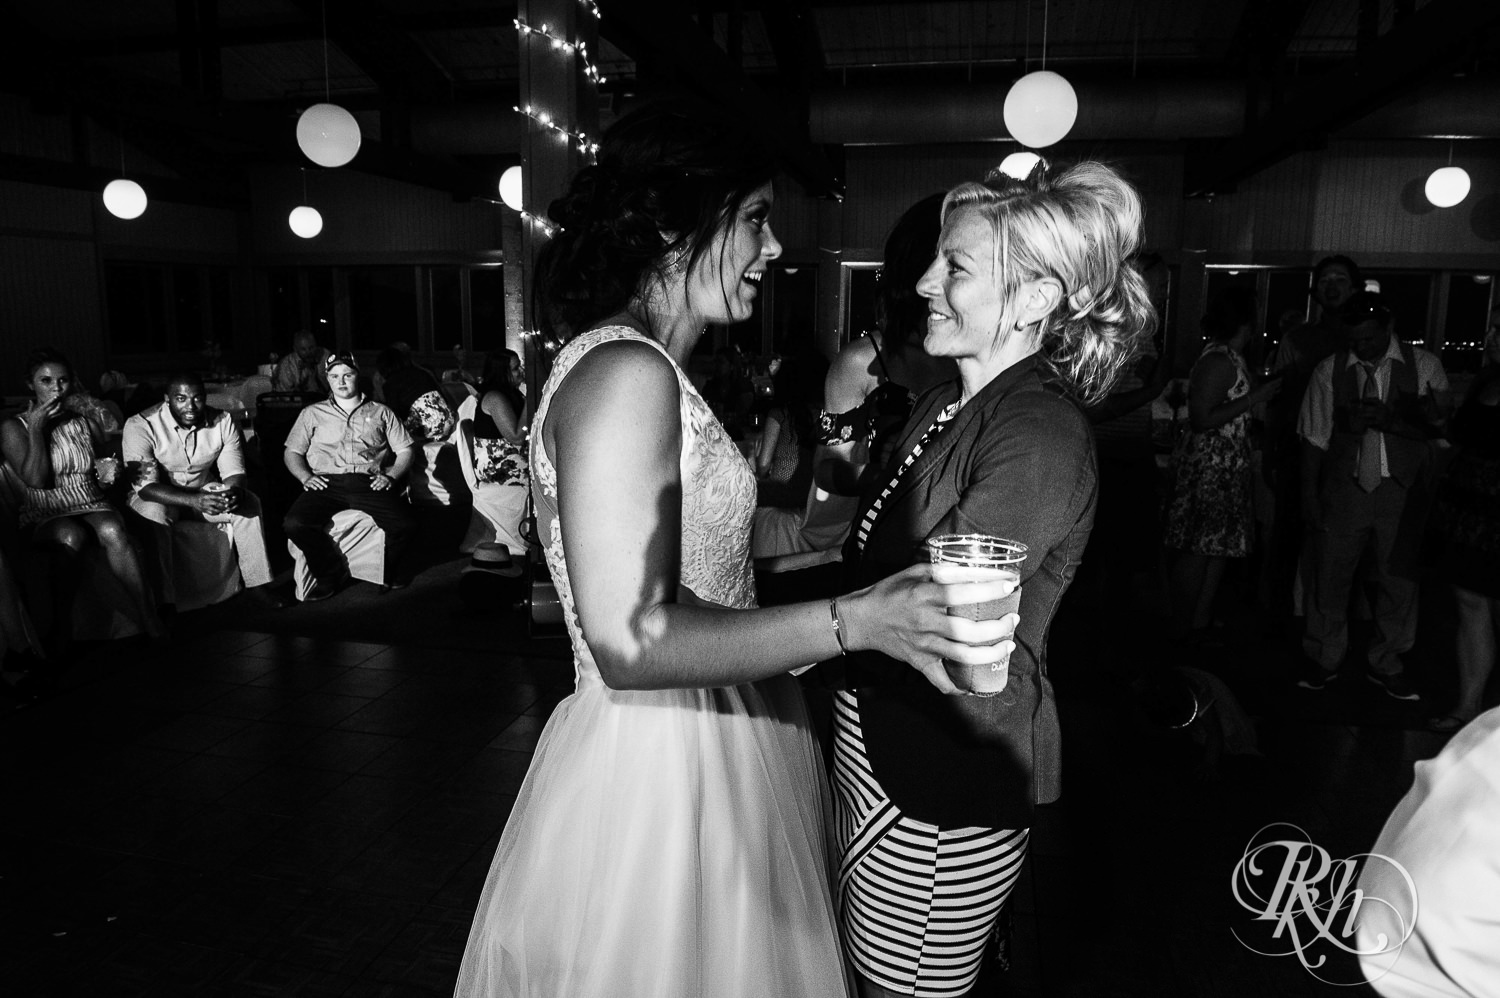 Lesbian brides and guests dance during their wedding reception at Spirit Mountain in Duluth, Minnesota.